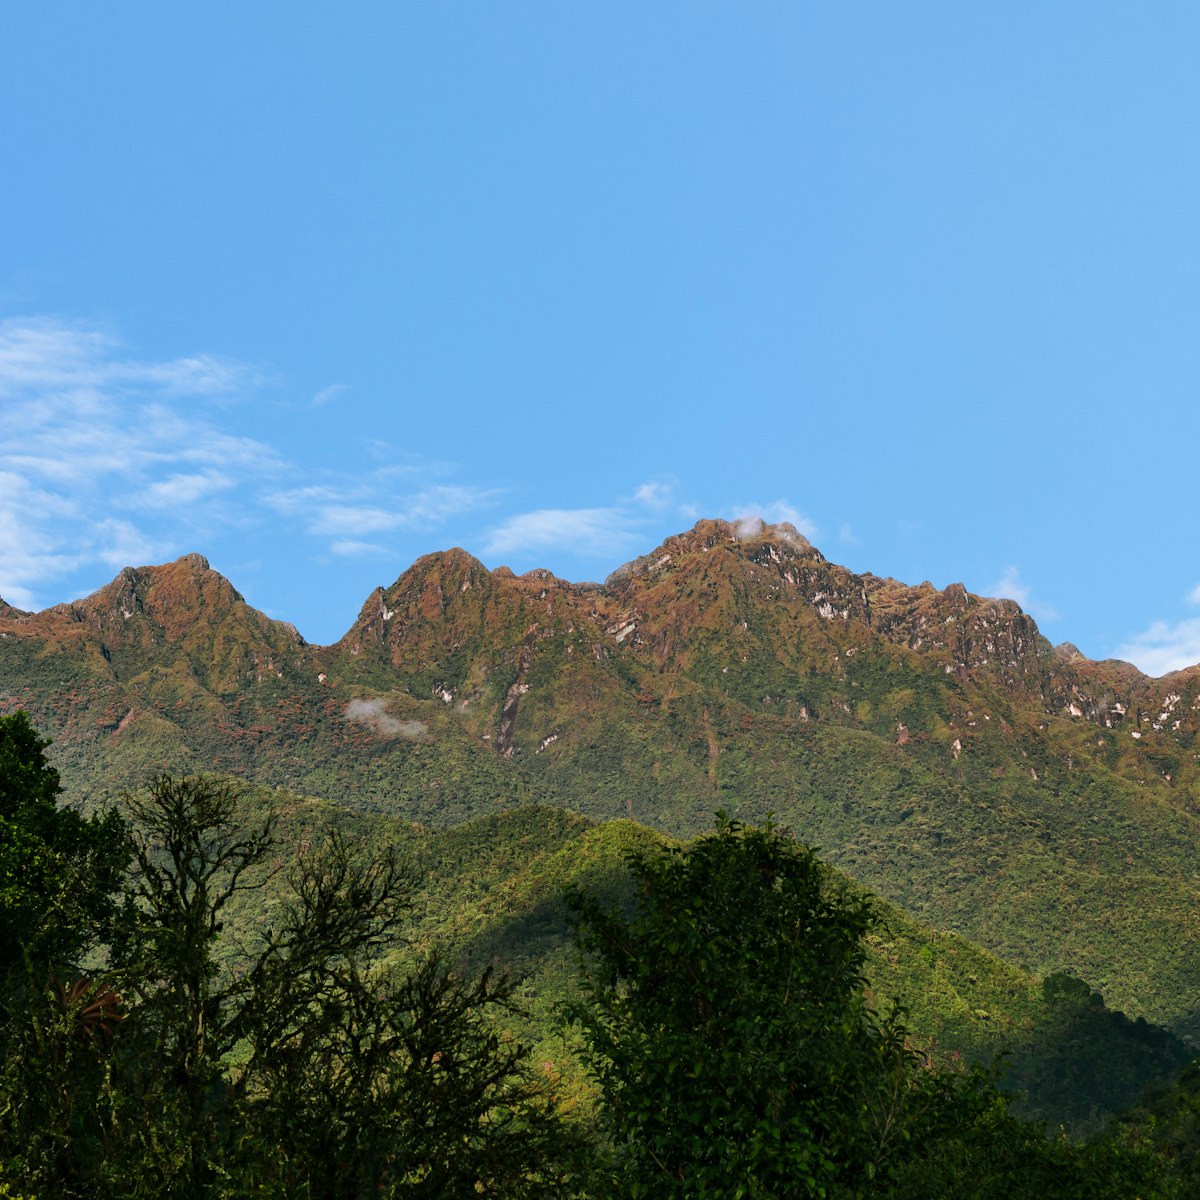 Mountains of the Farallones de Cali National Park, Colombia.